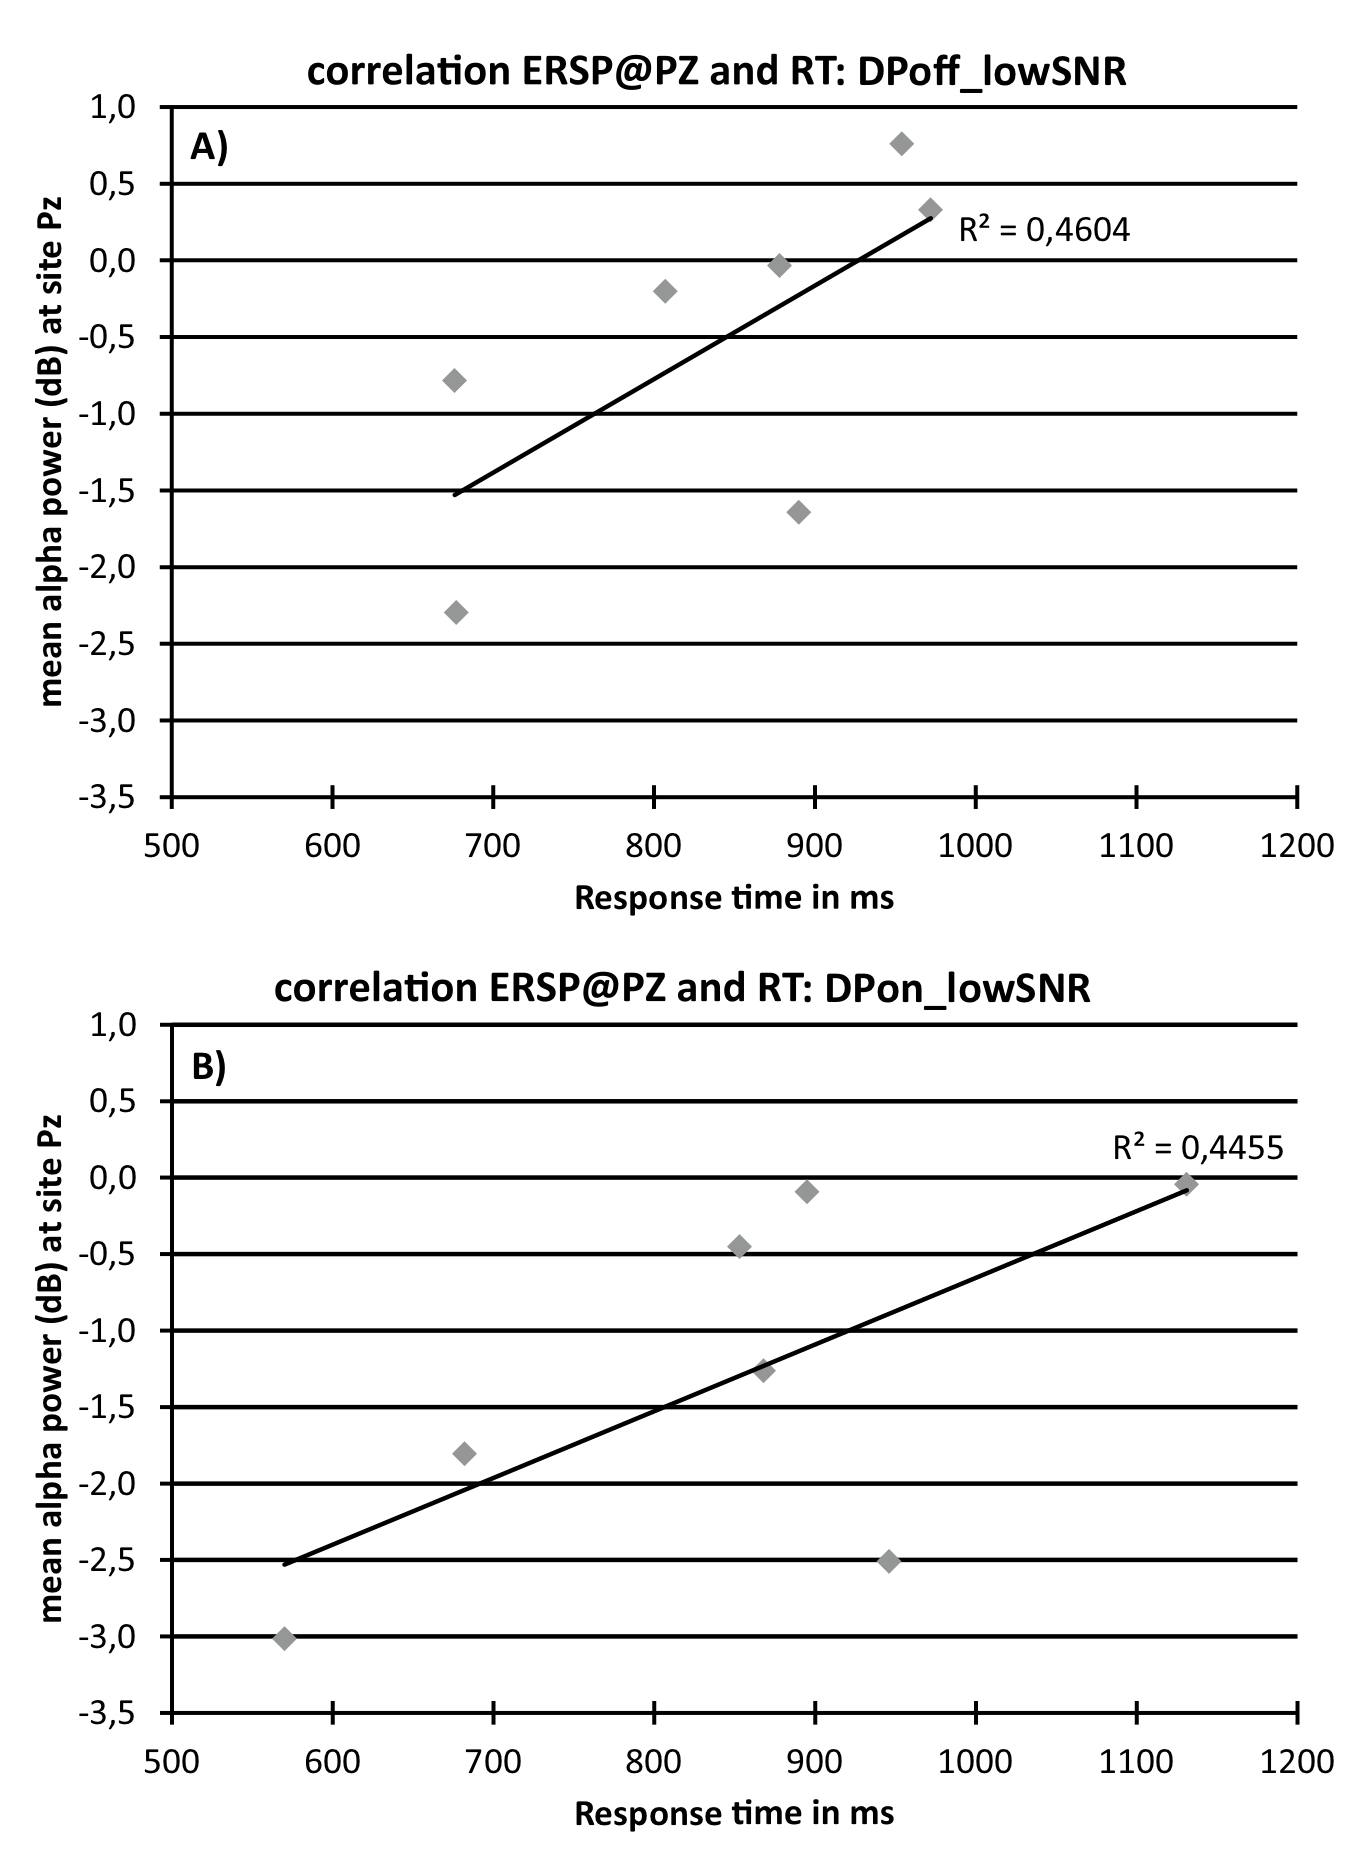 Scatterplots showing the correlation between response times and alpha band ERSP data at electrode Pz